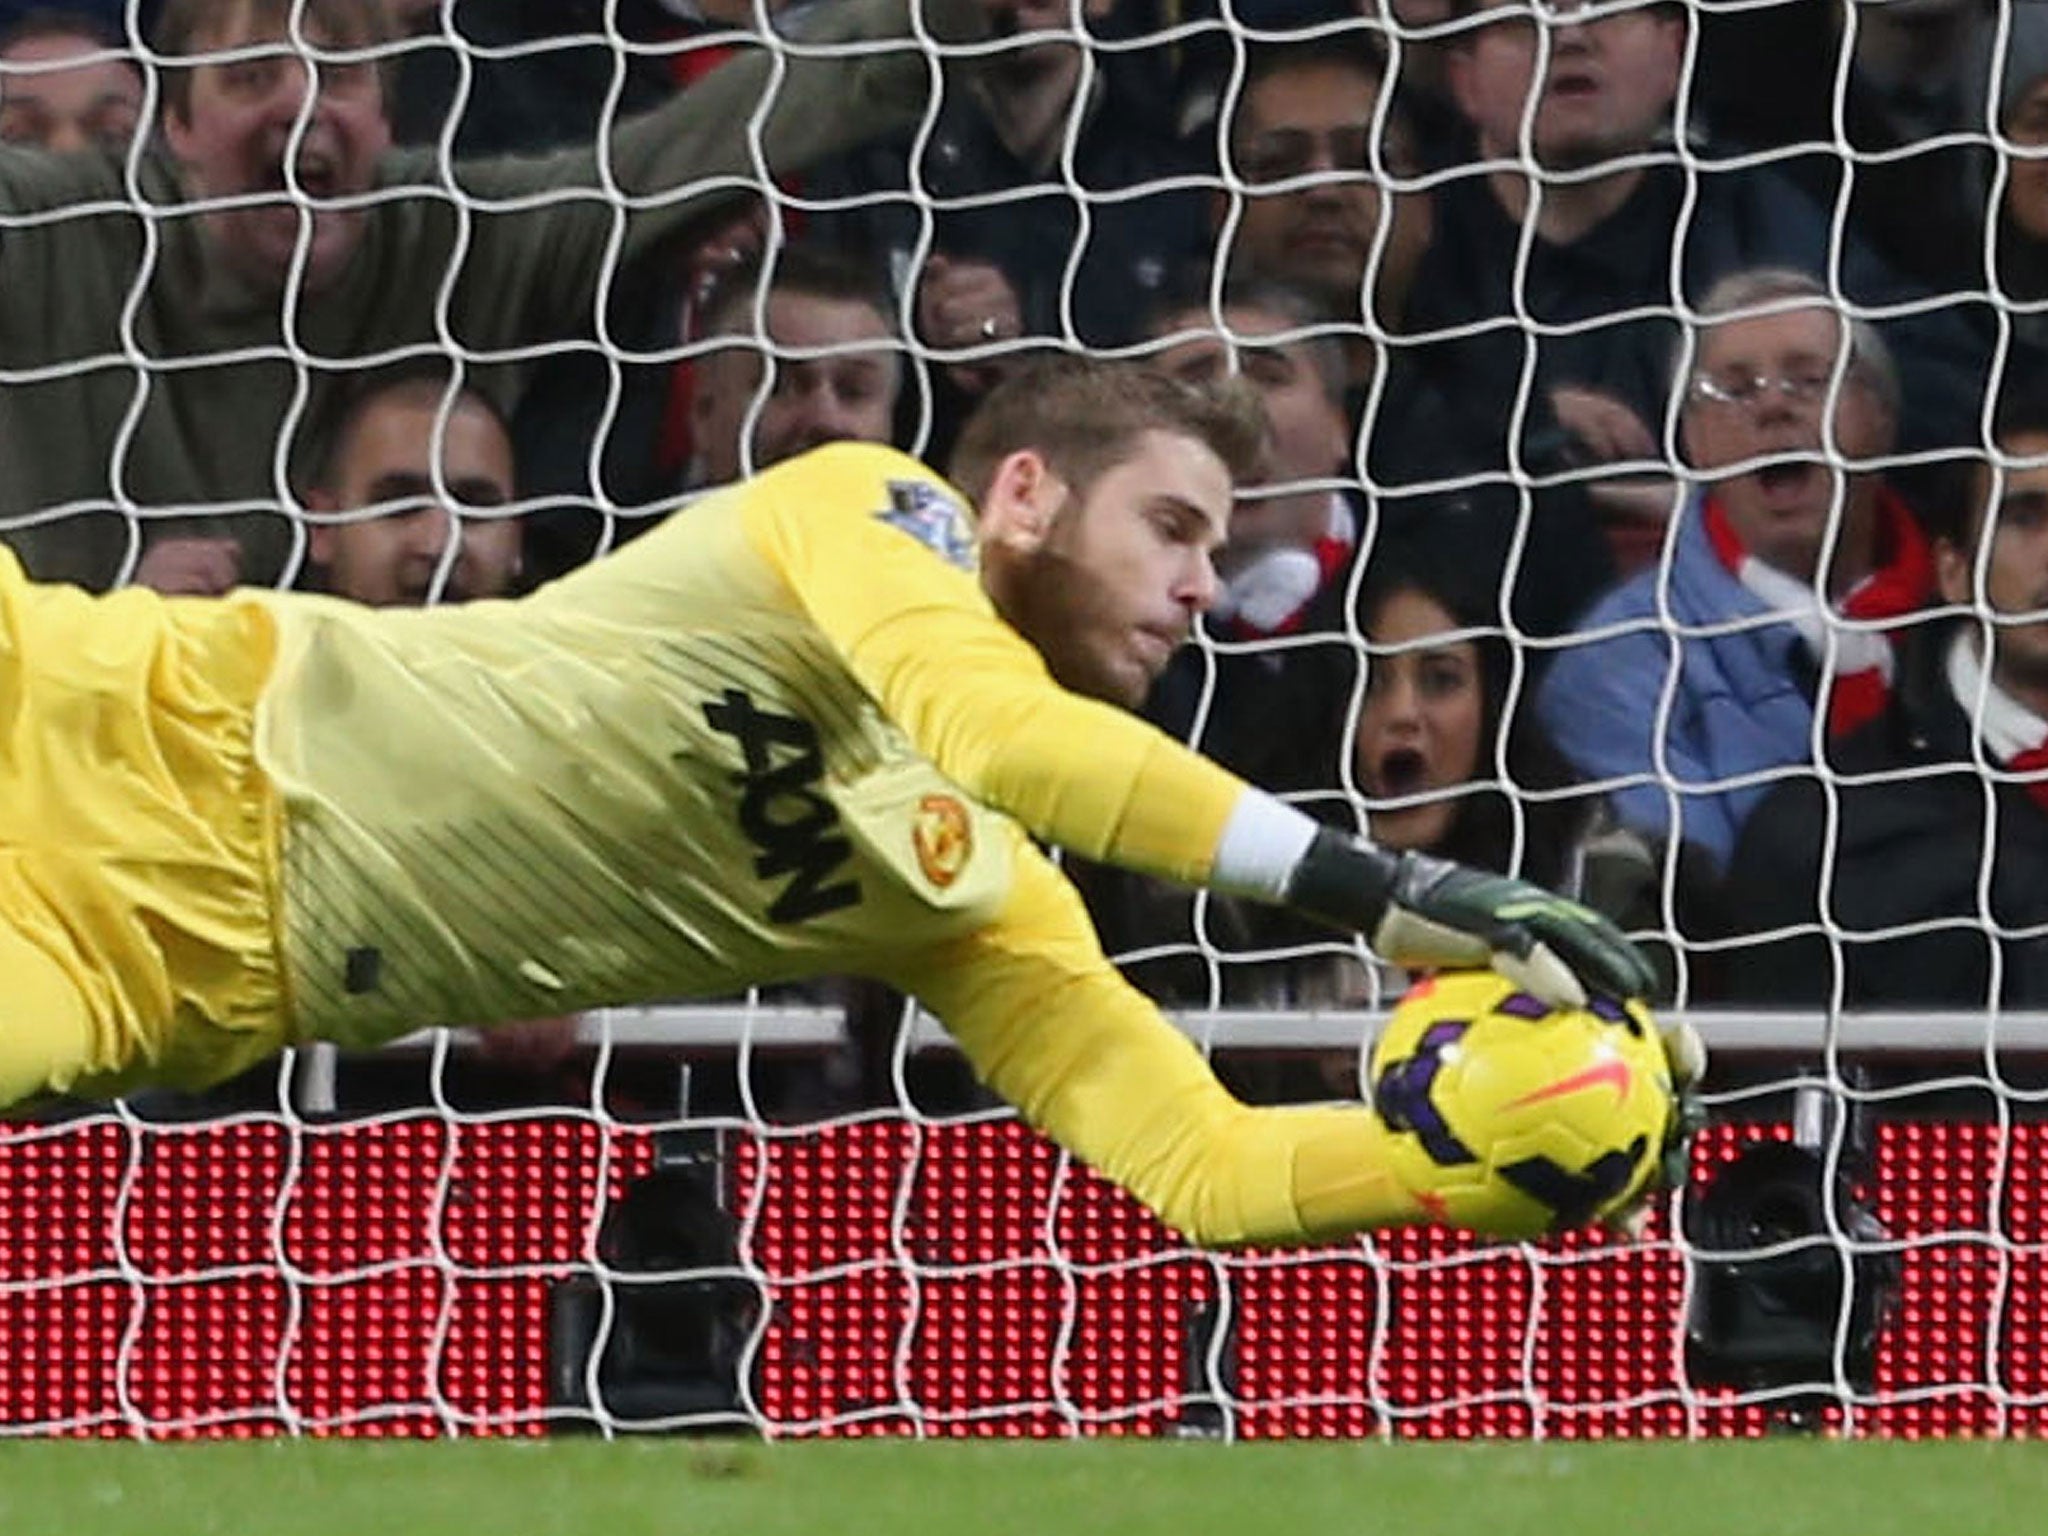 David De Gea was named Manchester United's Player of the Season